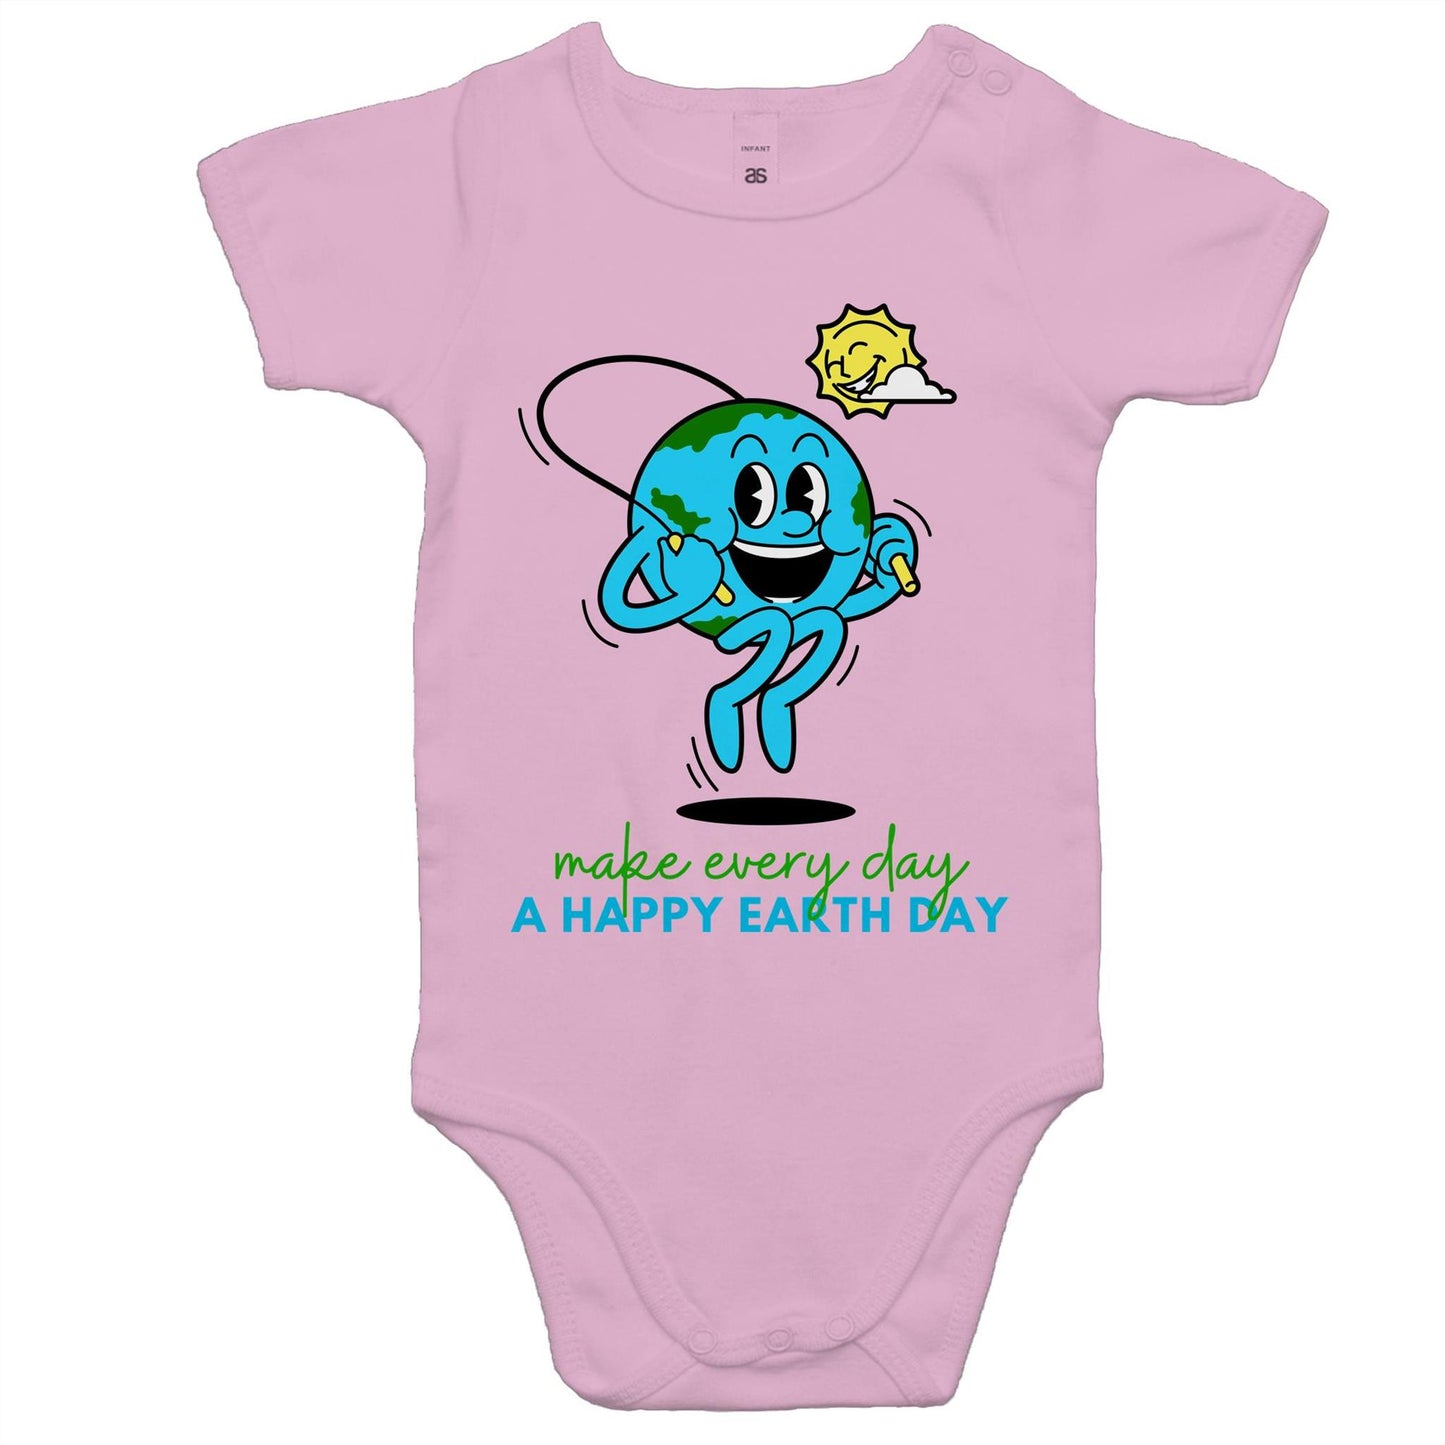 Make Every Day A Happy Earth Day - Baby Bodysuit Pink Baby Bodysuit Environment